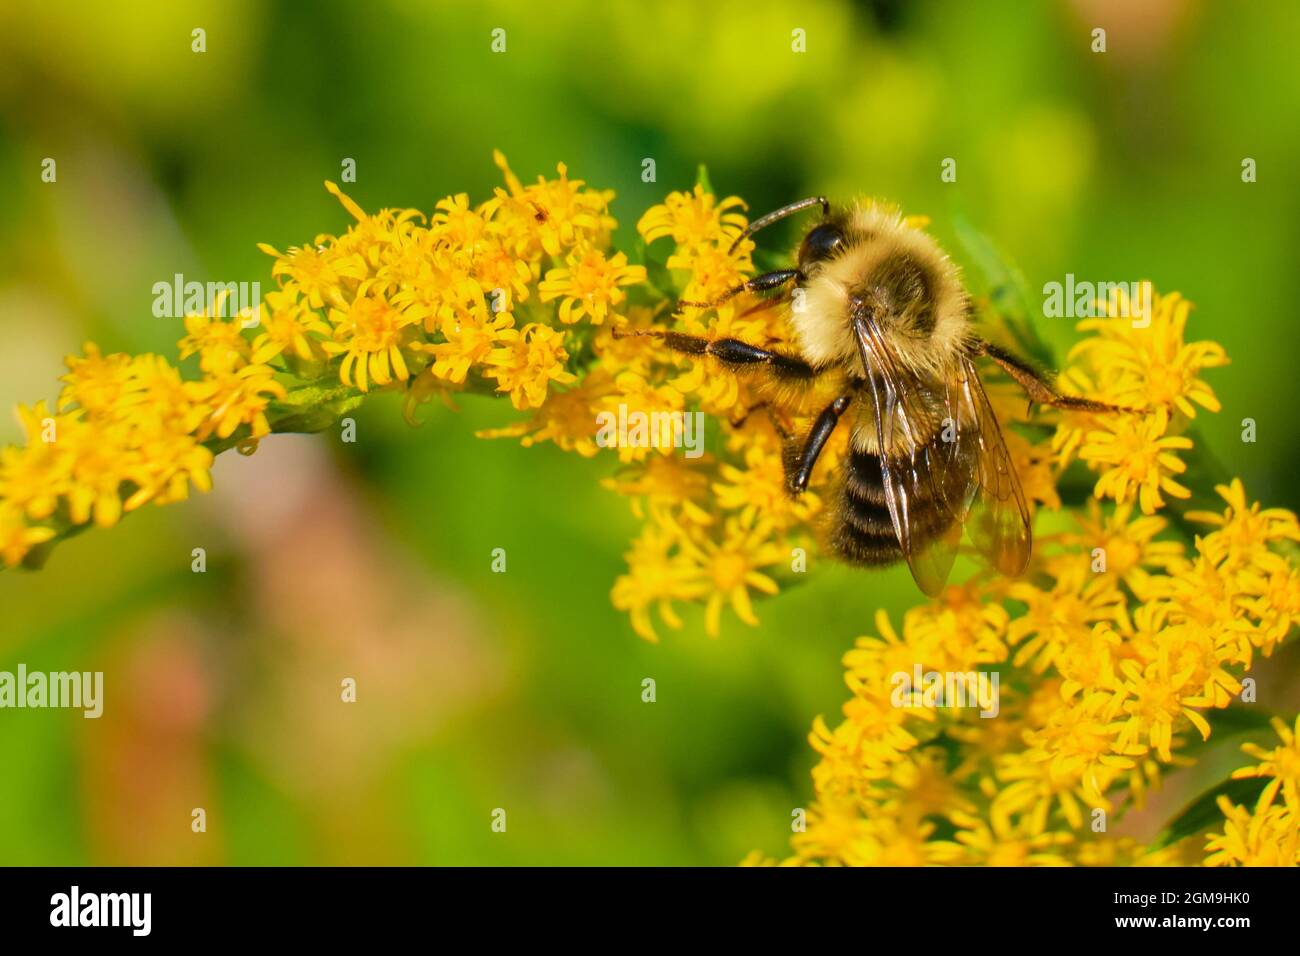 Common eastern bumble bee pollinates wild yellow flowers in late summer Stock Photo